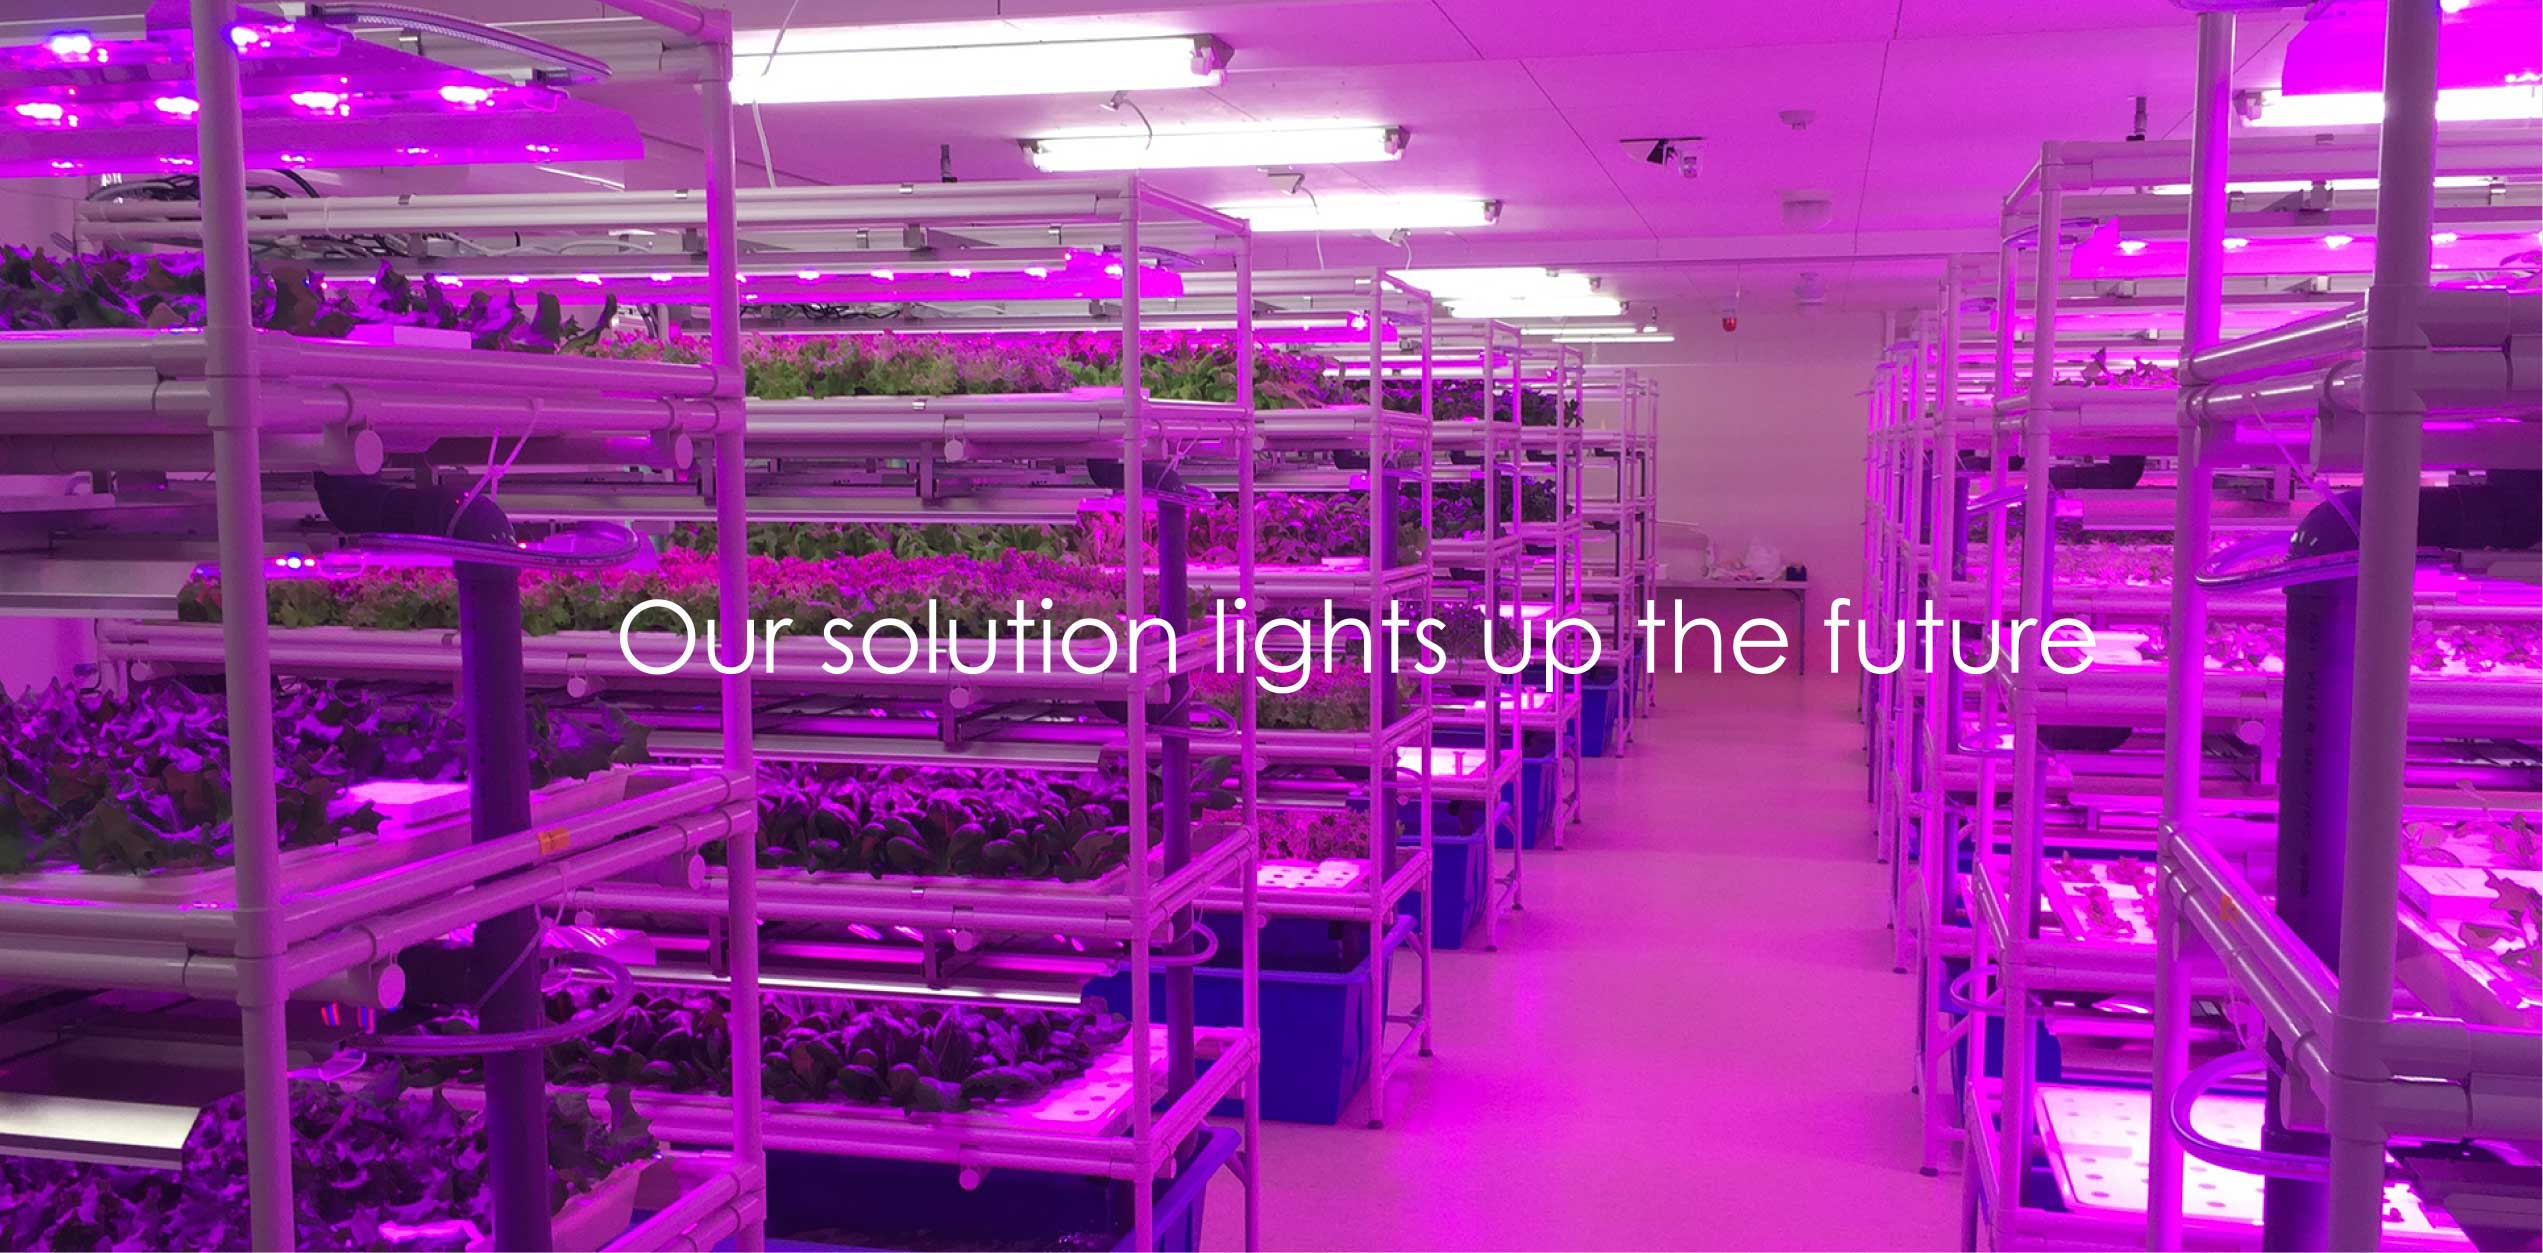 Our solution lights up the future